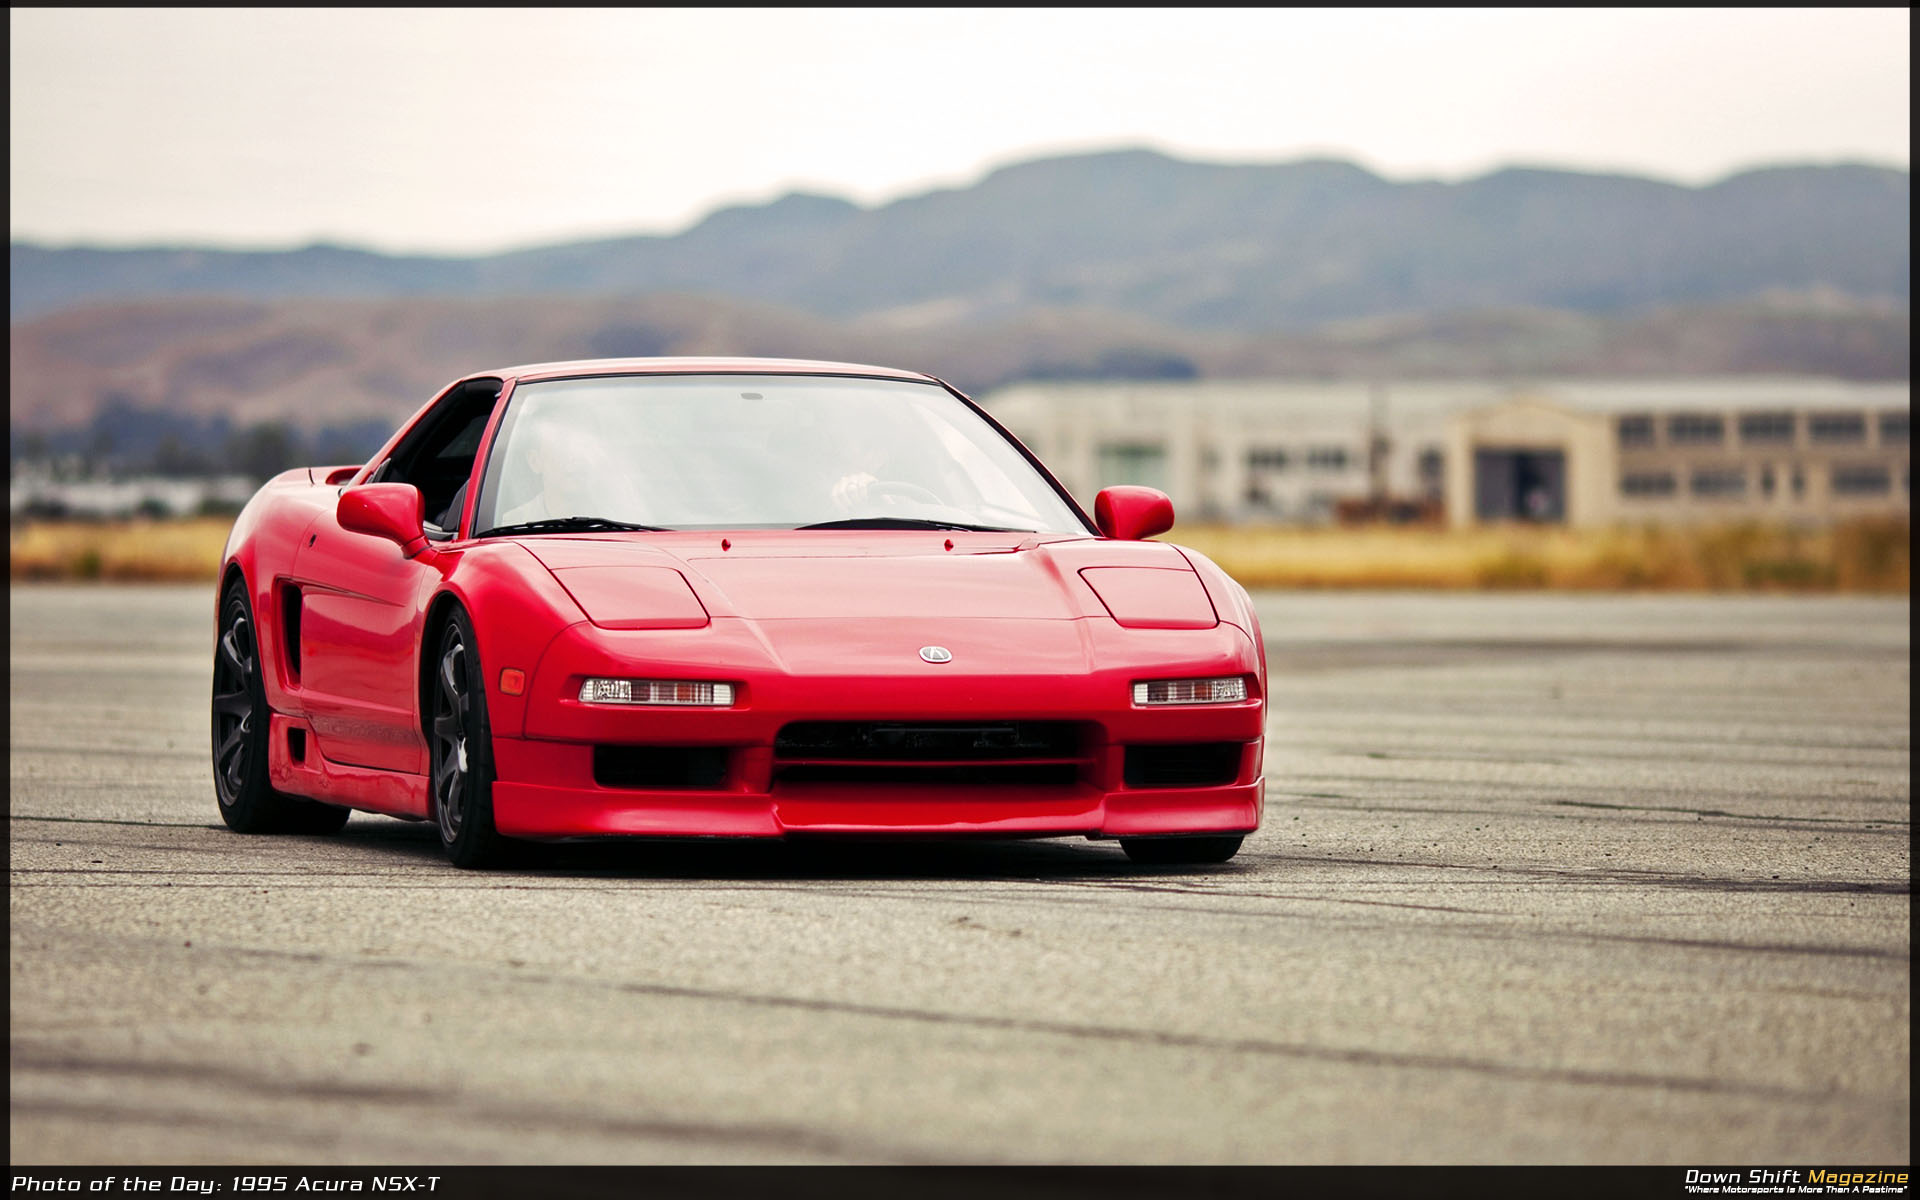 acura nsx-t related images,51 to 100 - Zuoda Images